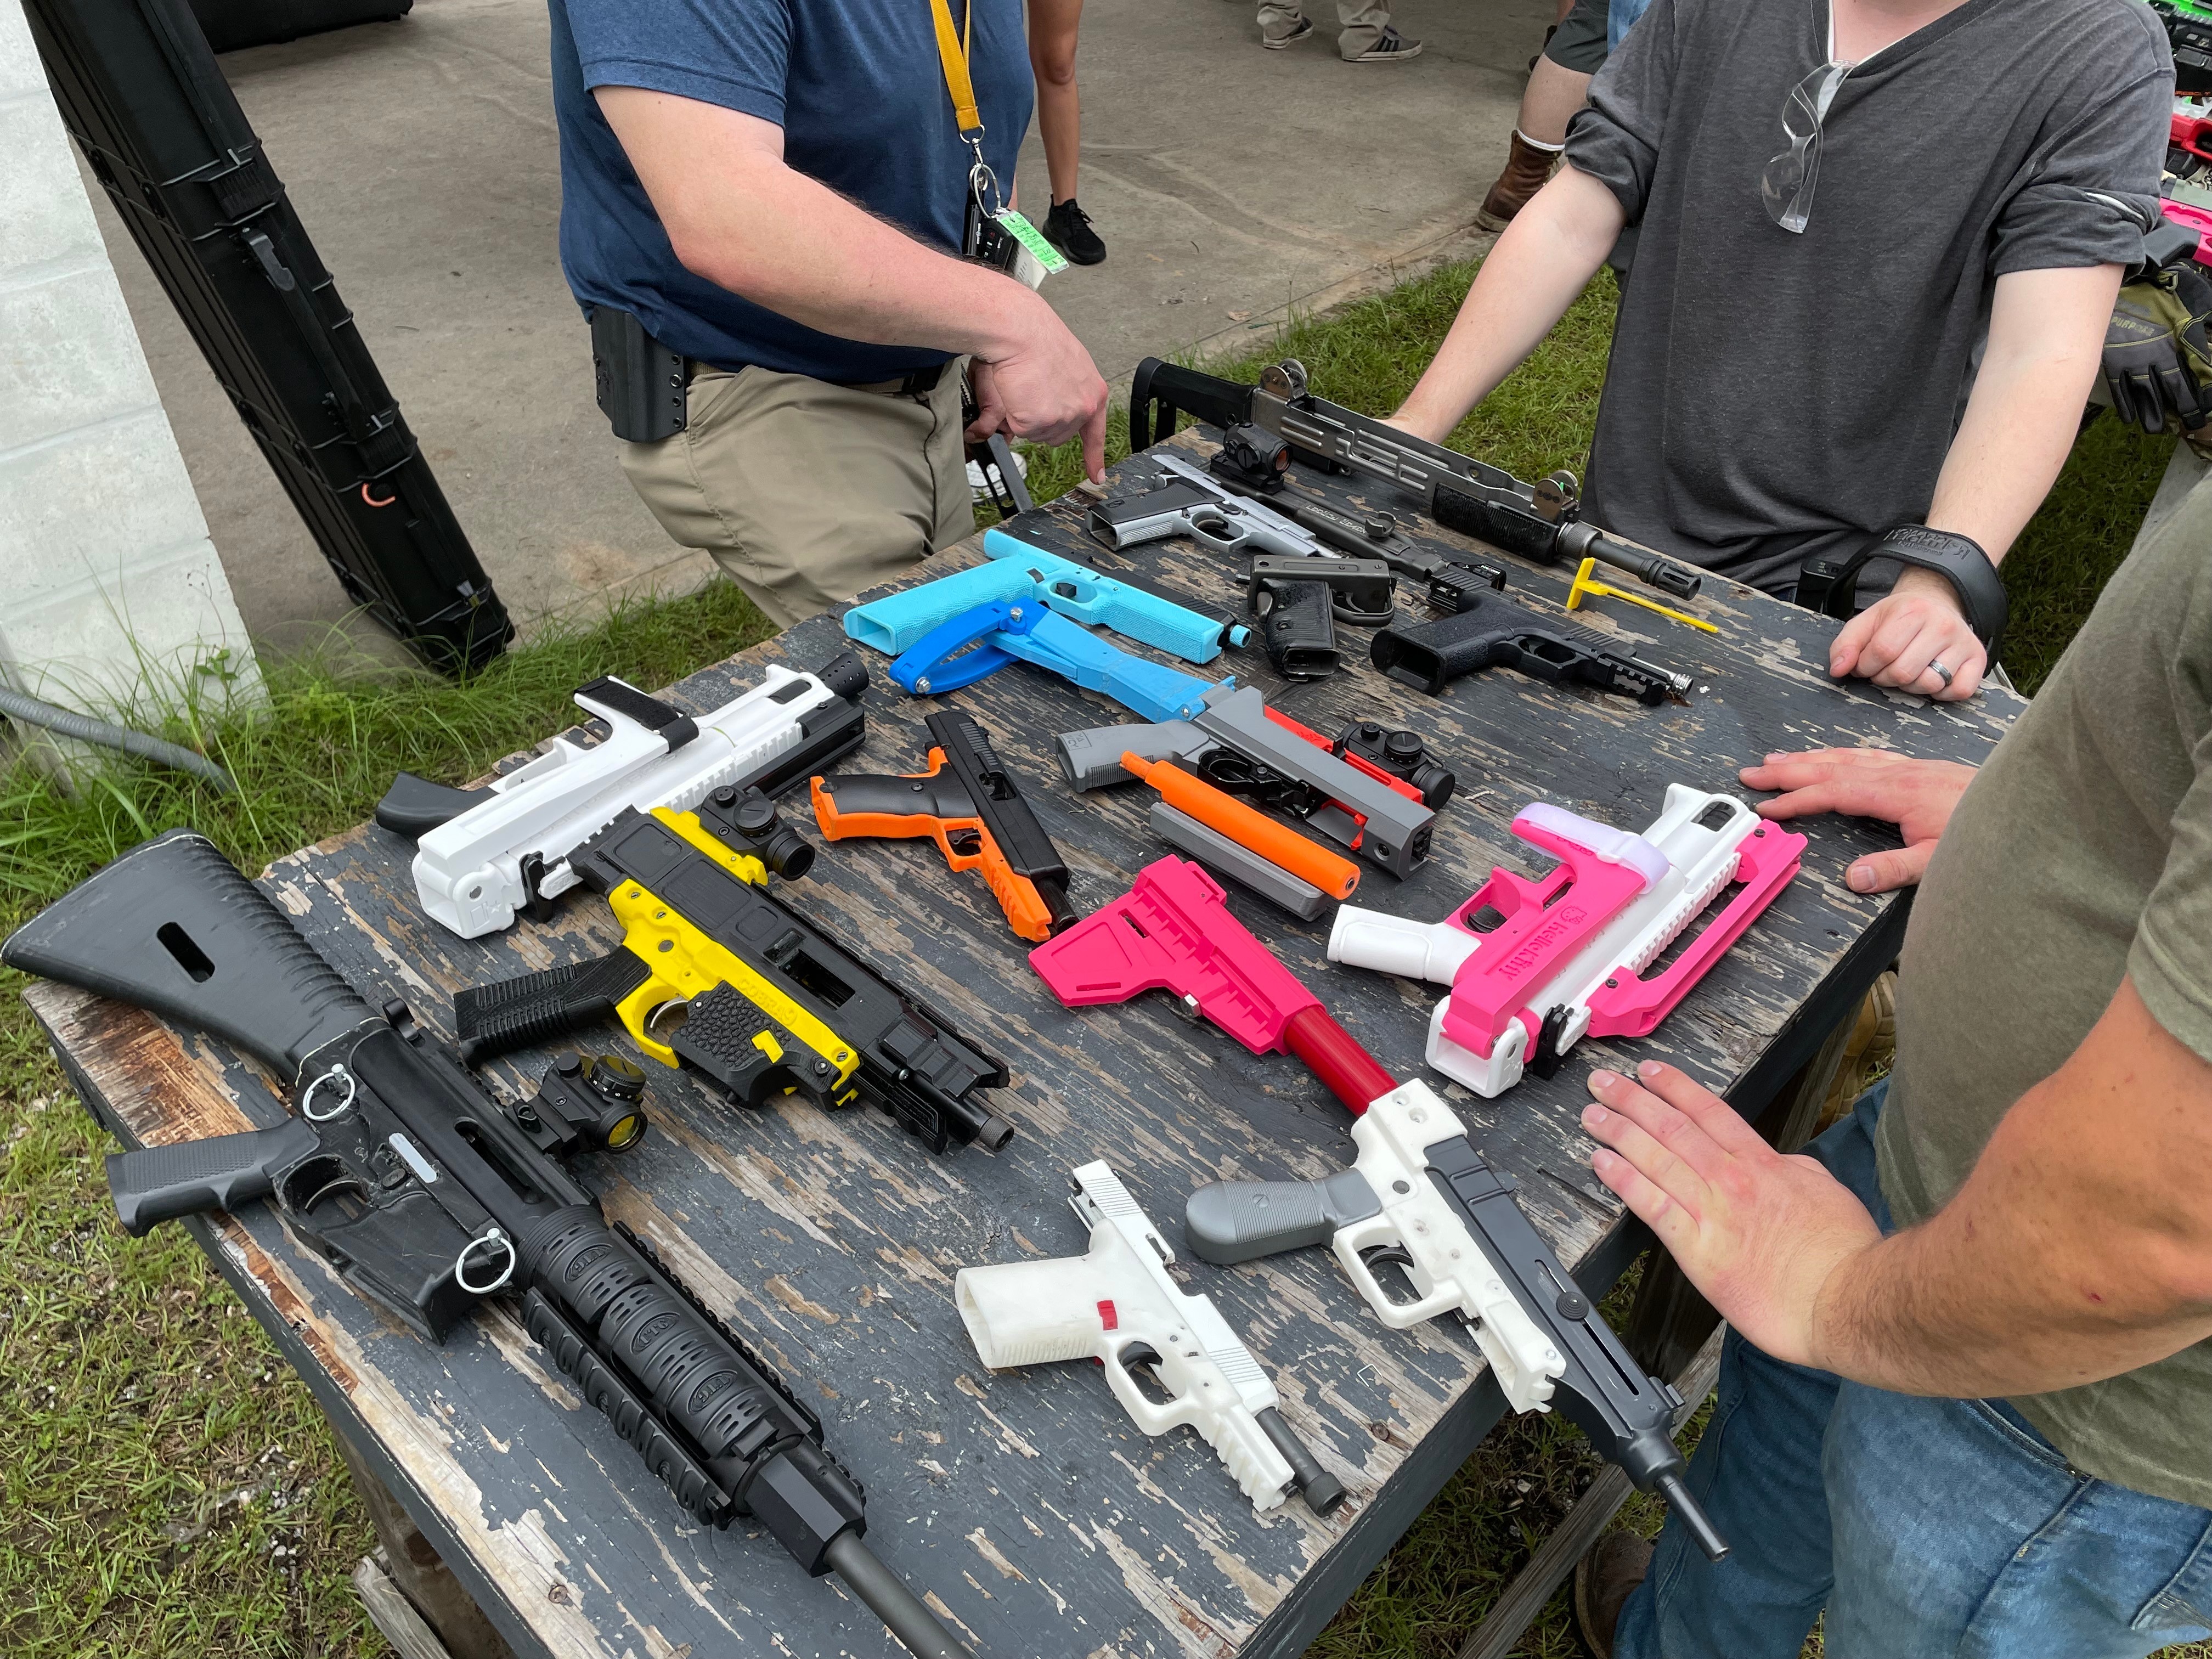 Guns from the 3D Printer: The Shadowy, Homemade Weapons Community